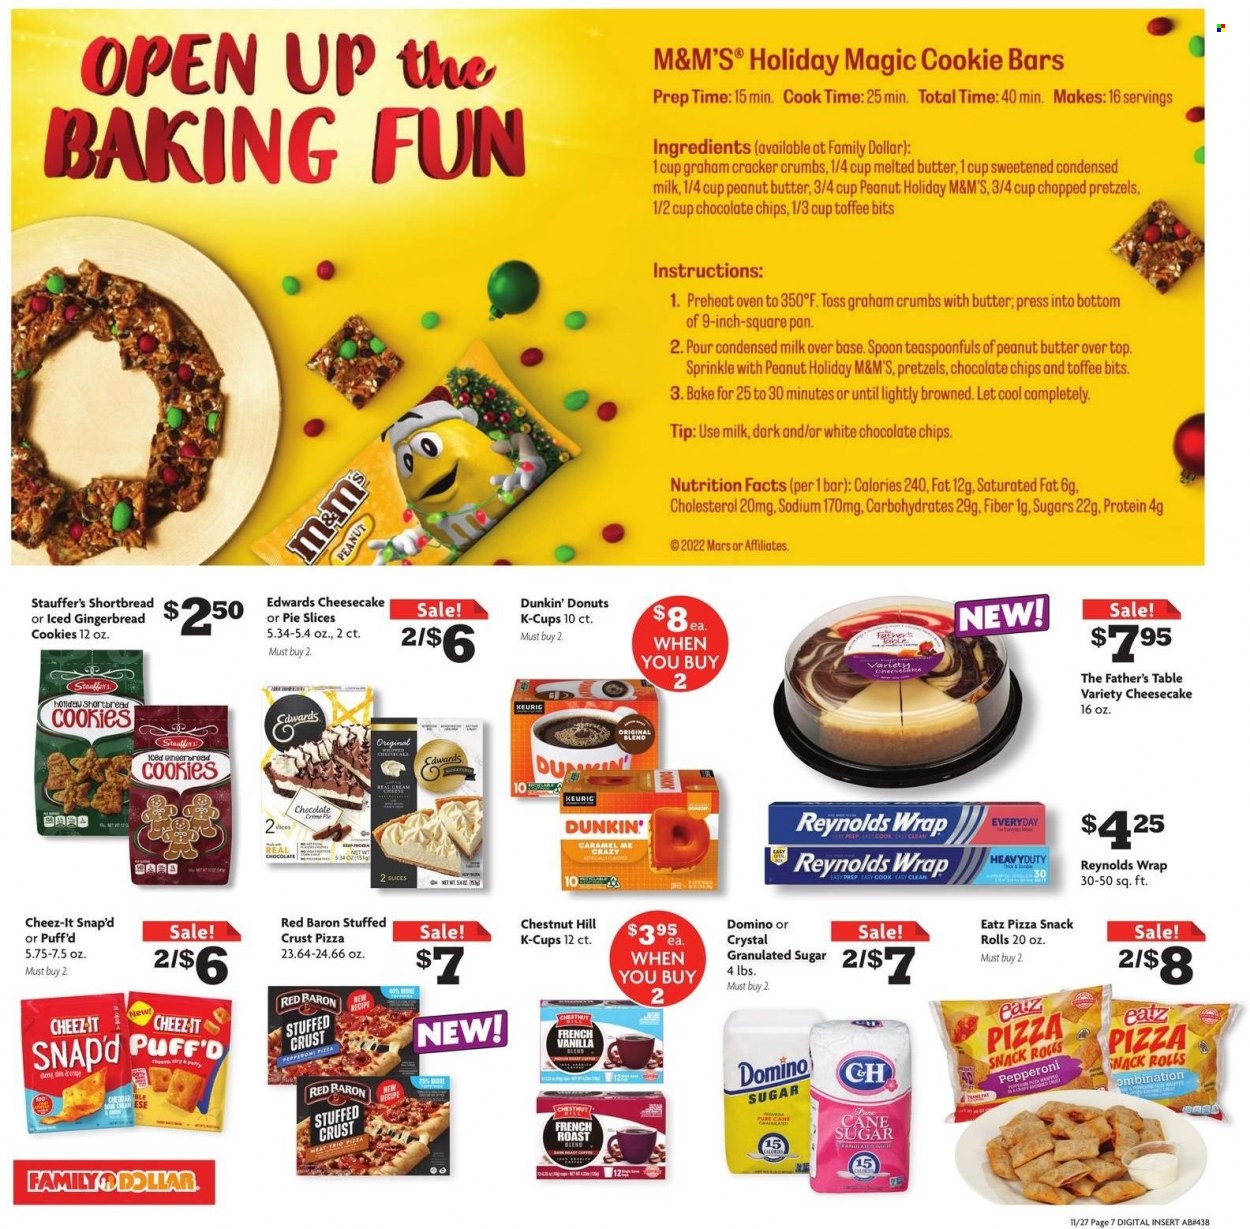 thumbnail - Family Dollar Flyer - 11/27/2022 - 12/03/2022 - Sales products - pretzels, Father's Table, gingerbread, cheesecake, donut, Dunkin' Donuts, cod, pizza, pepperoni, milk, condensed milk, sour cream, Red Baron, cookies, gingerbread cookies, snack, Mars, toffee, M&M's, crackers, Cheez-It, cane sugar, granulated sugar, sugar, caramel, peanut butter, coffee capsules, K-Cups, Keurig, spoon. Page 5.